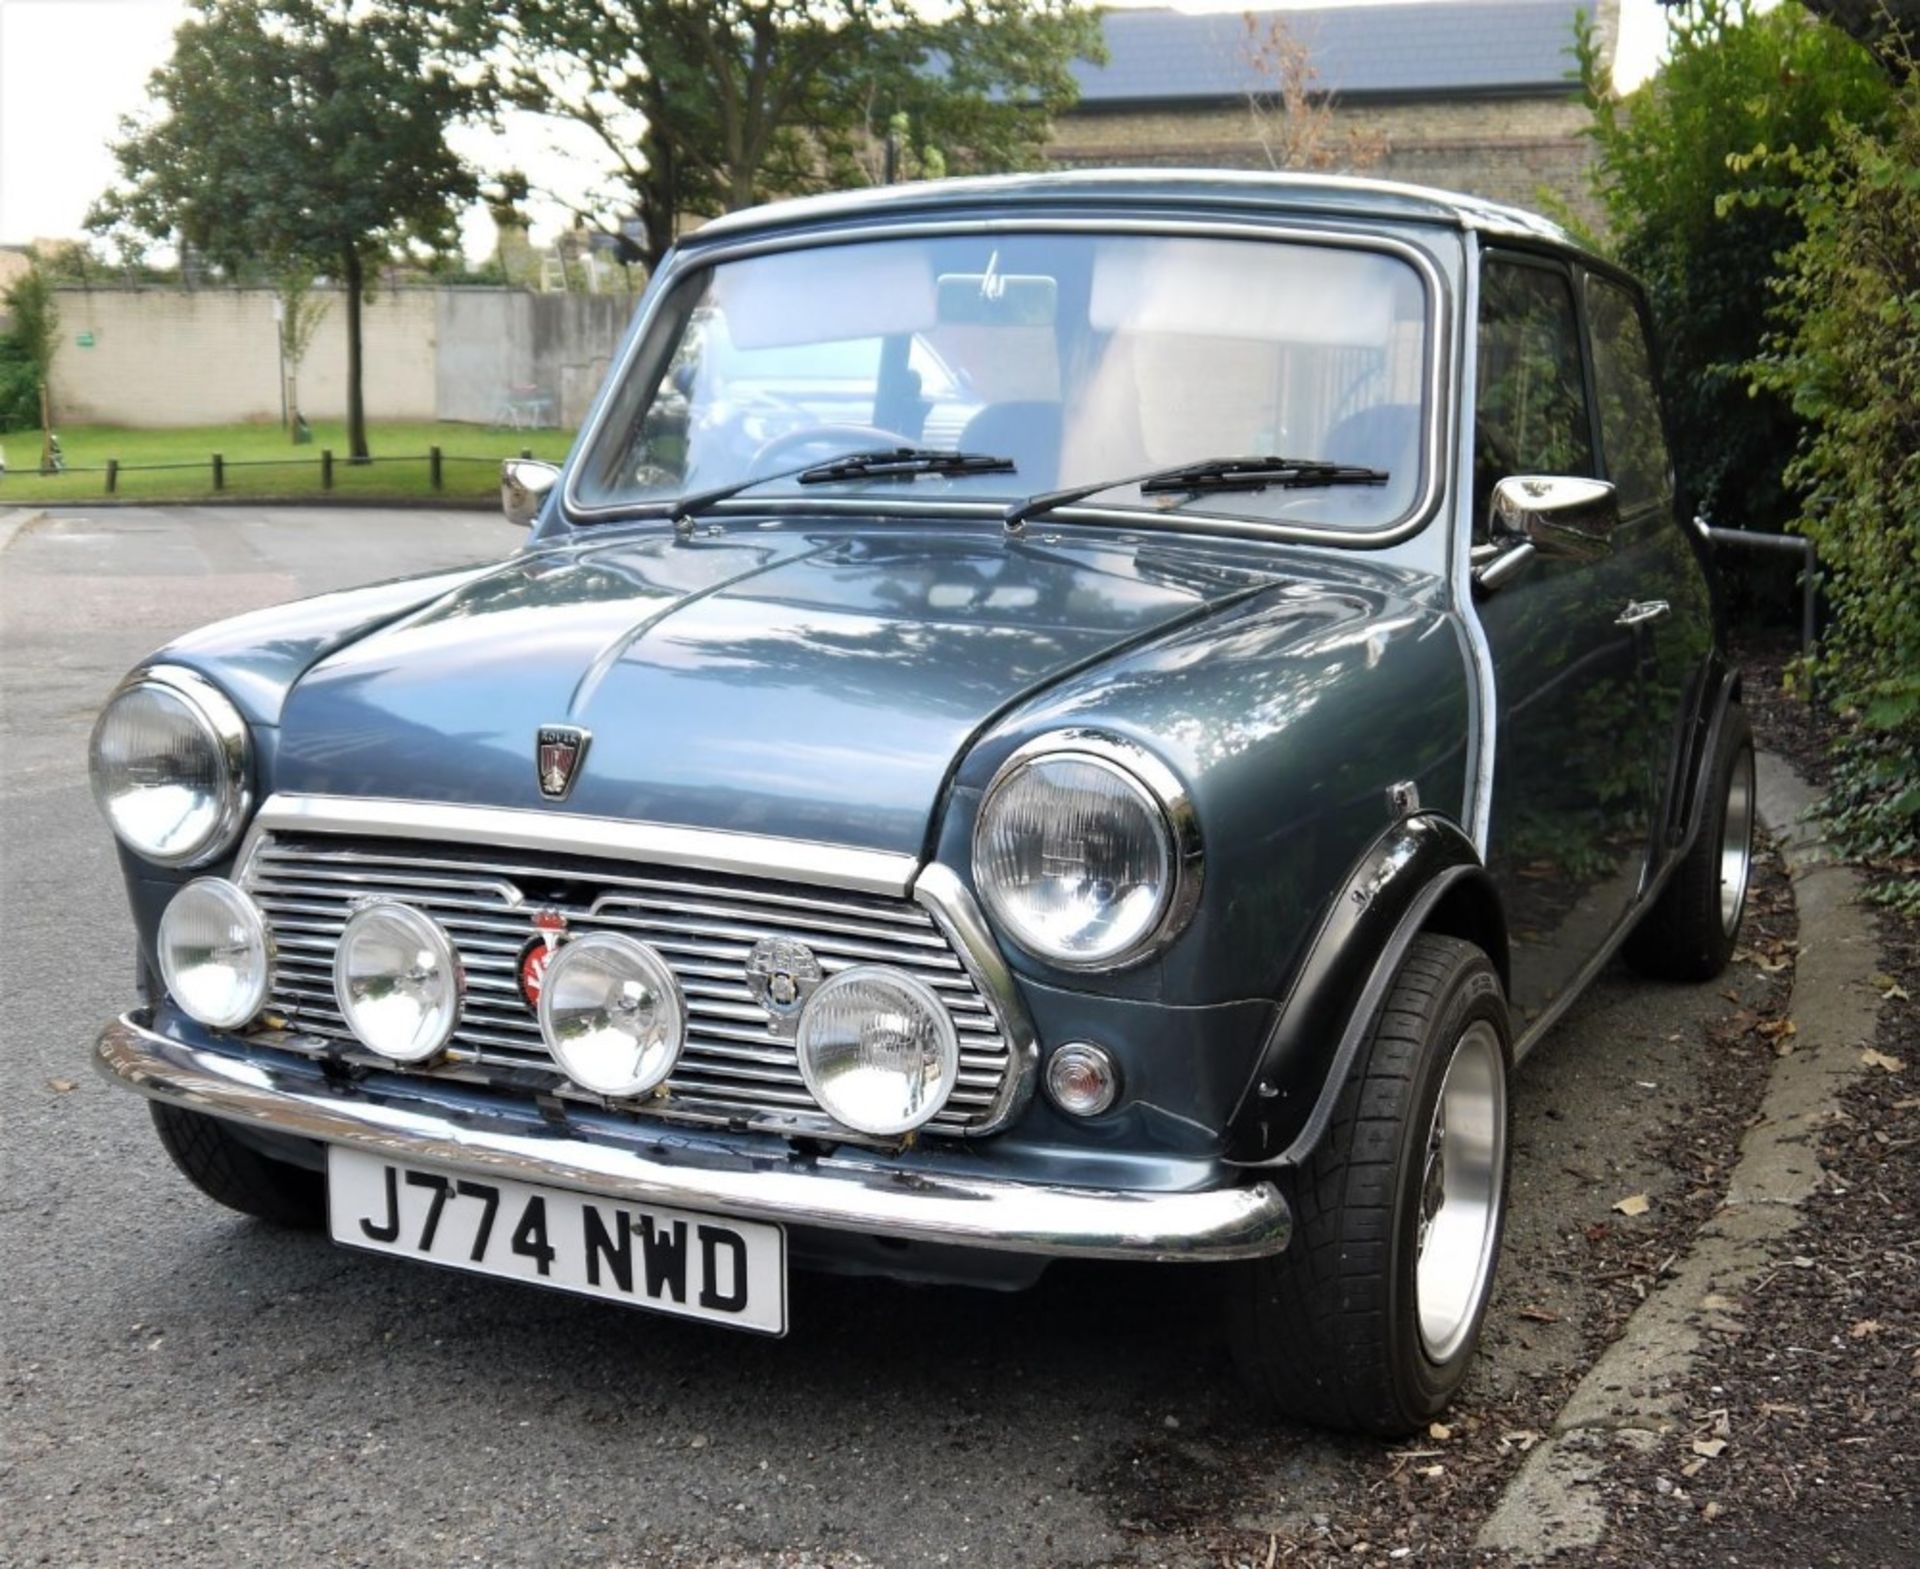 1991 ROVER MINI NEON Registration Number: J774 NWD Recorded Mileage: 58,000 miles Chassis Number: - Image 17 of 24